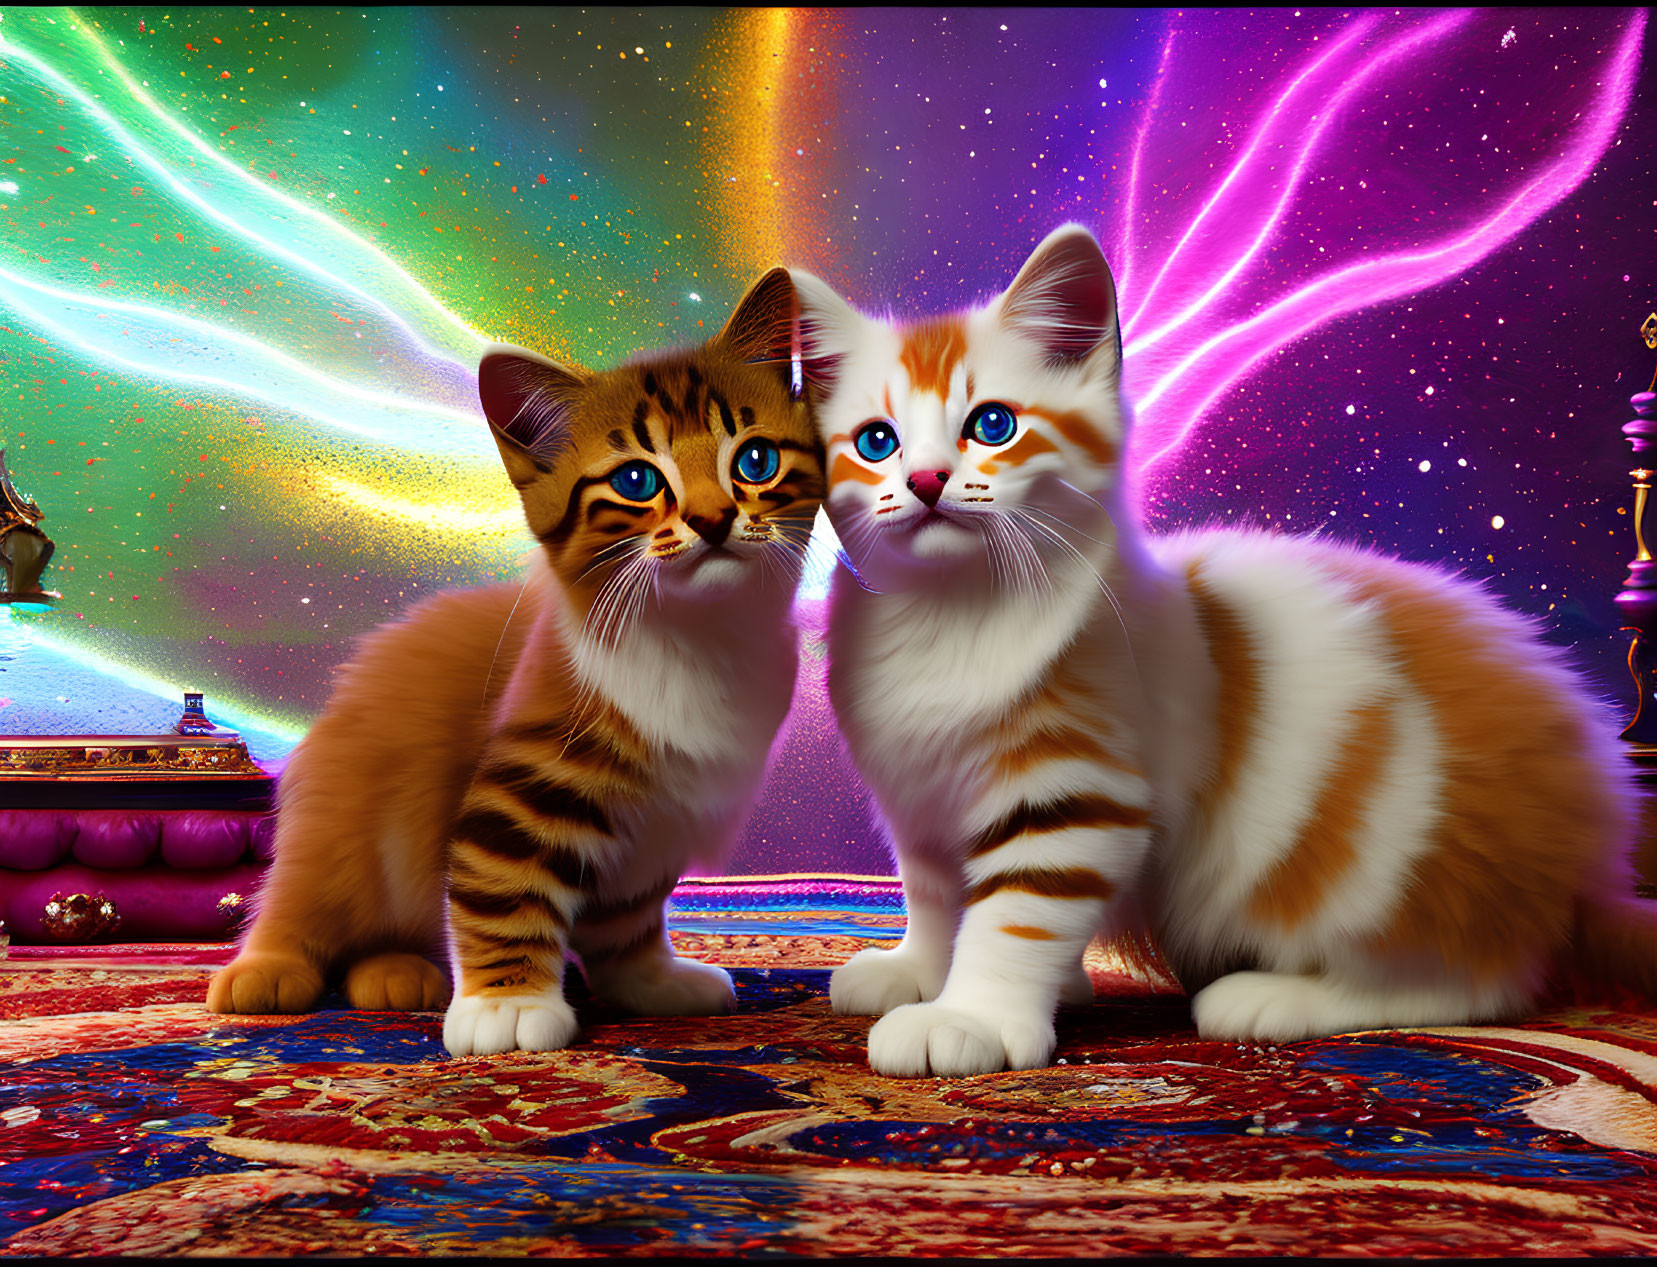 Vibrant kittens with large blue eyes on cosmic carpet